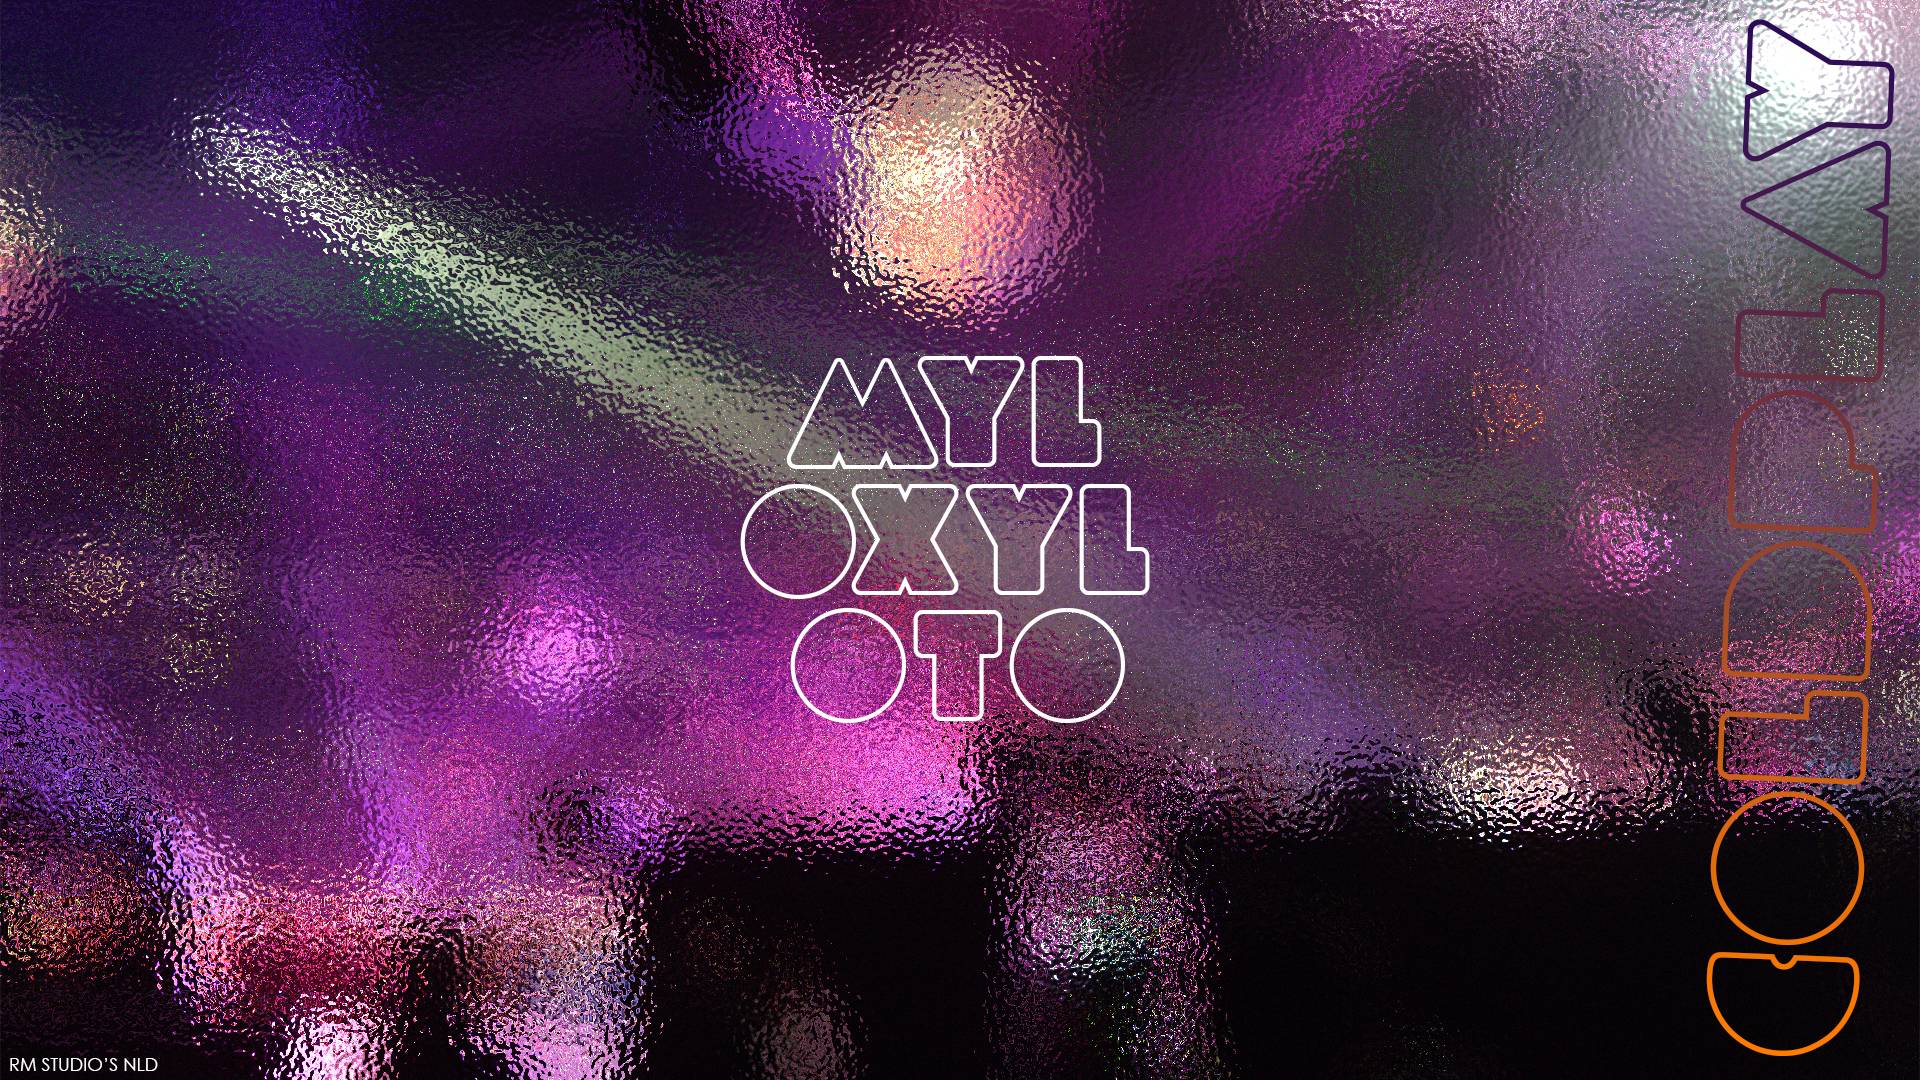 DeviantArt: More Like Coldplay Mylo Xyloto wallpapers by RMstudiosNLD